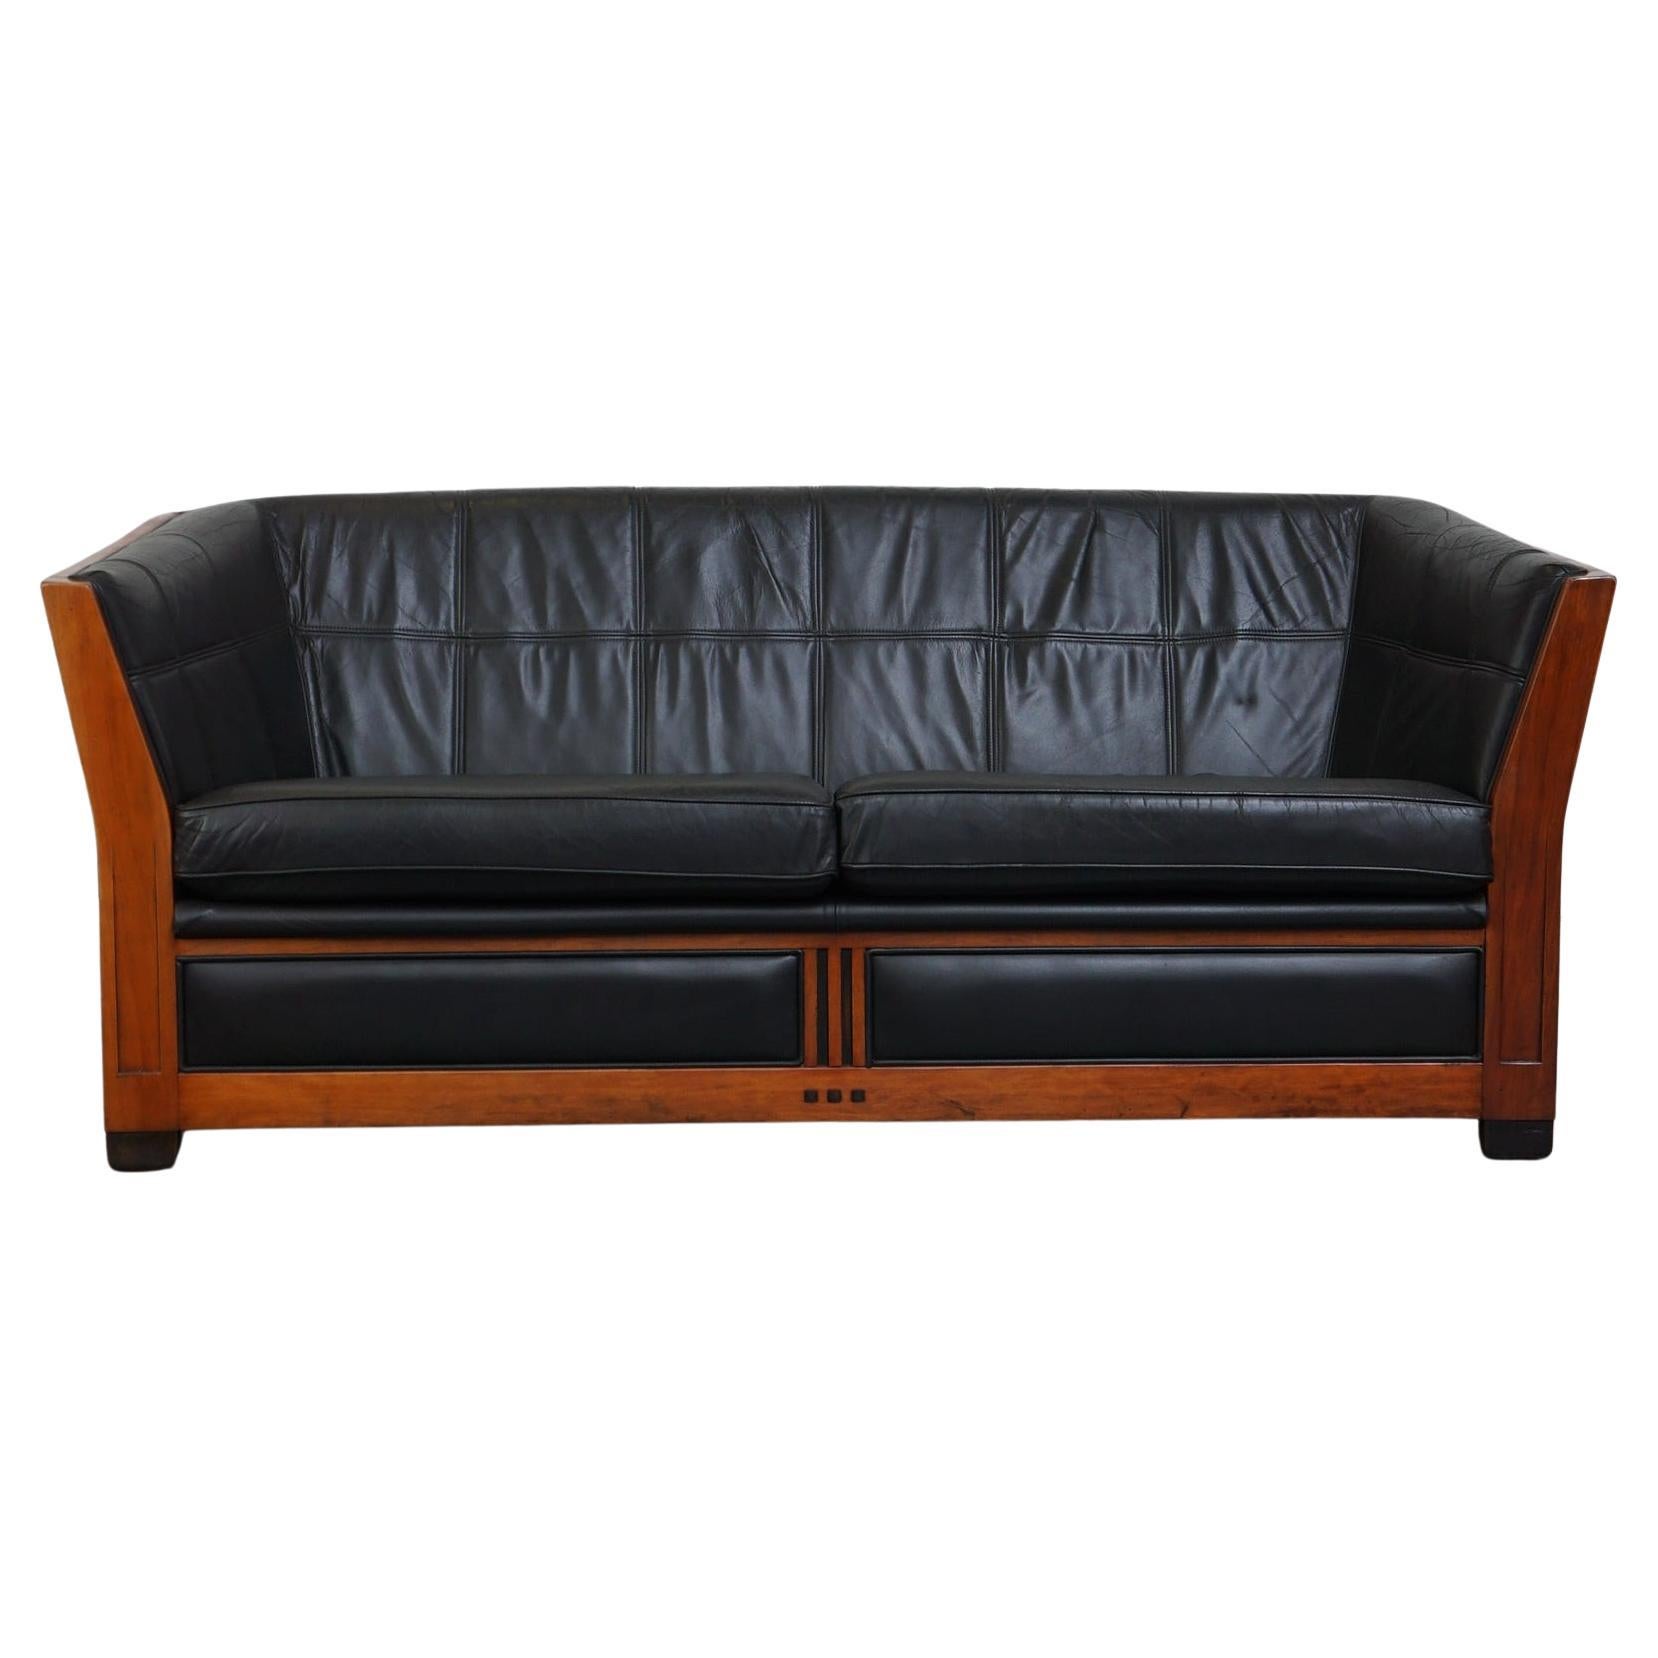 Unique black leather and wooden Art Deco design 2.5-seater sofa with a stunning  For Sale